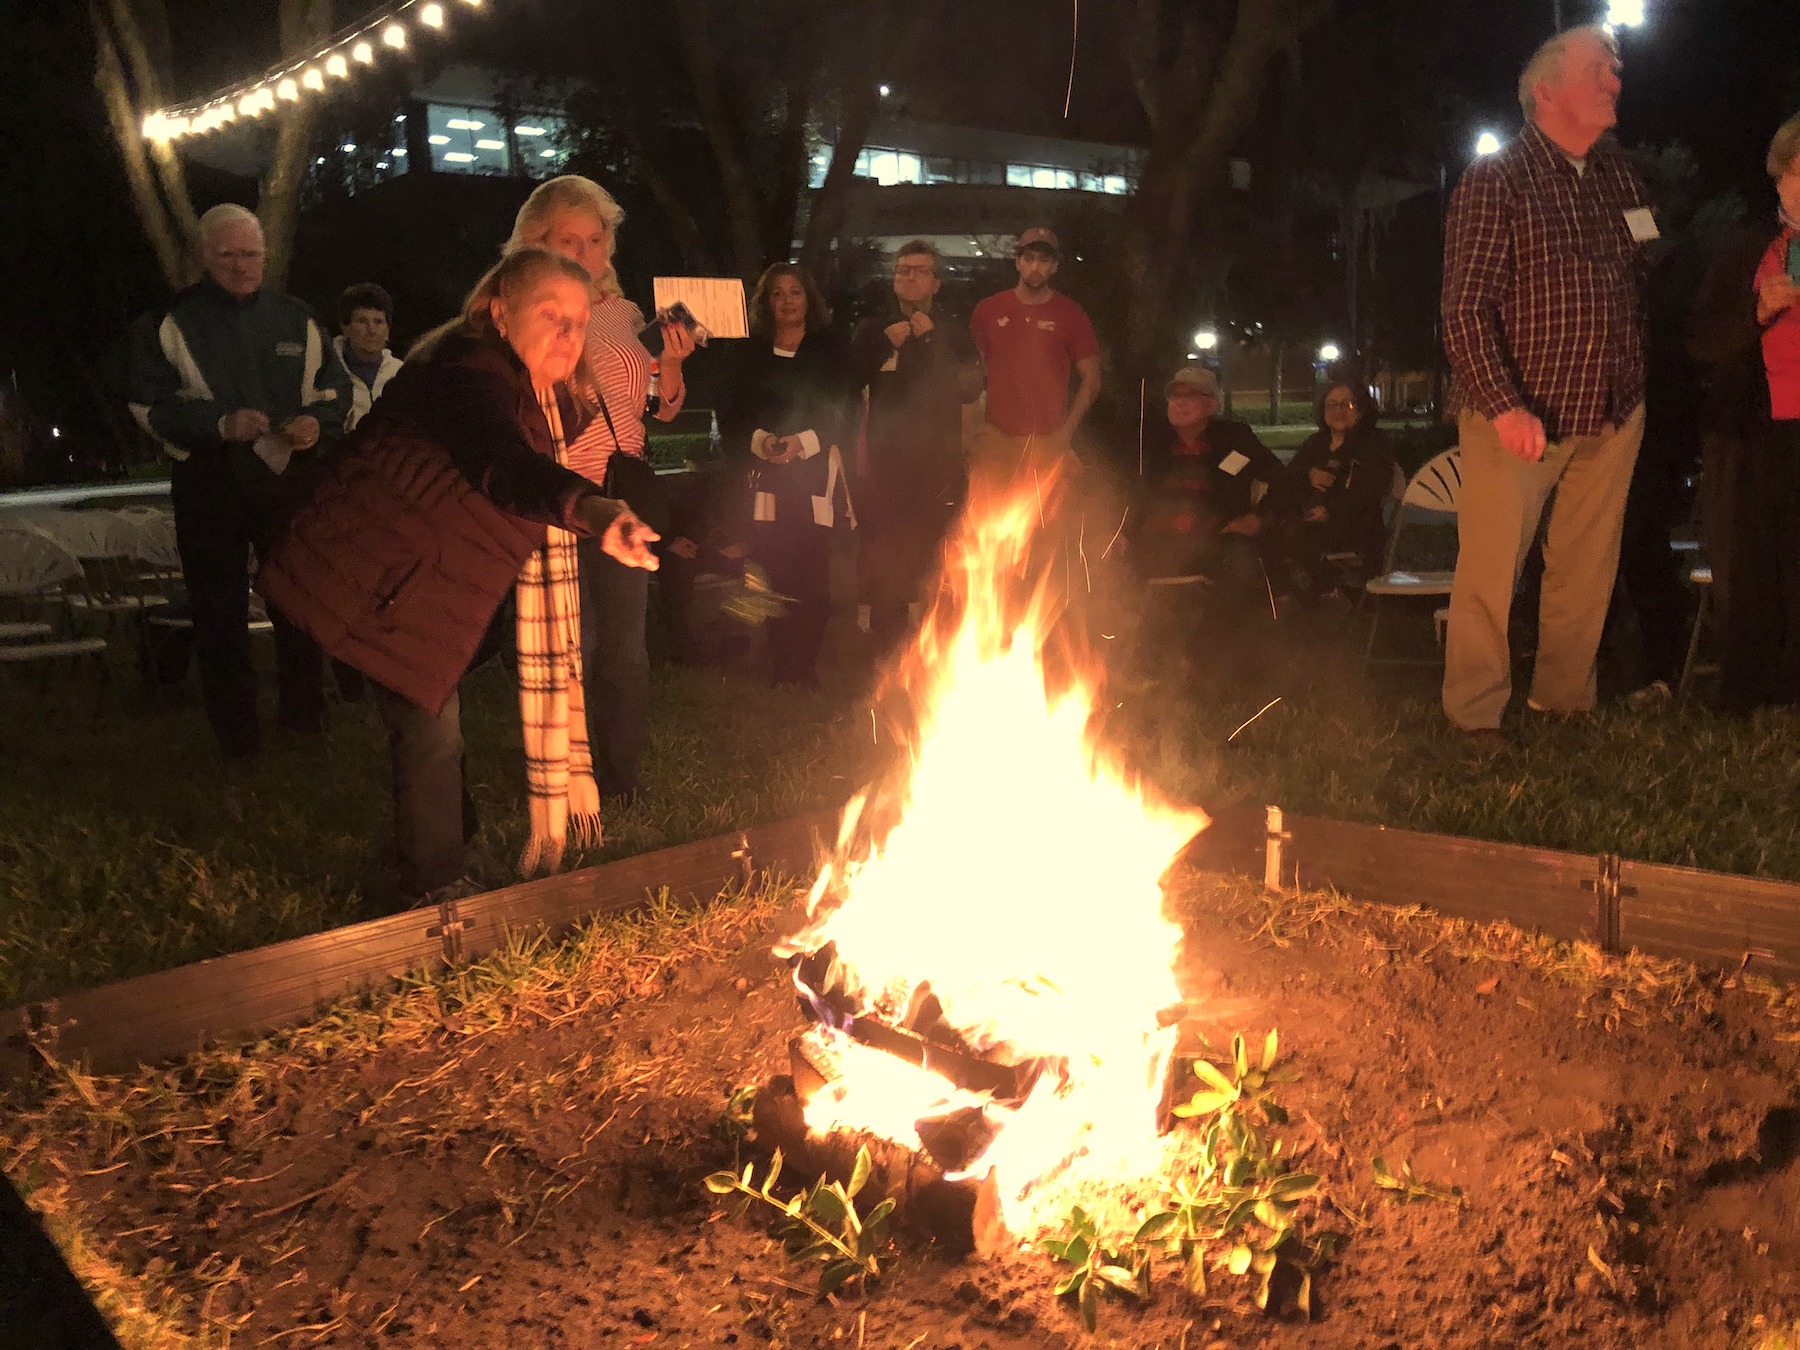 People throw sprigs into the Yule Log bonfire